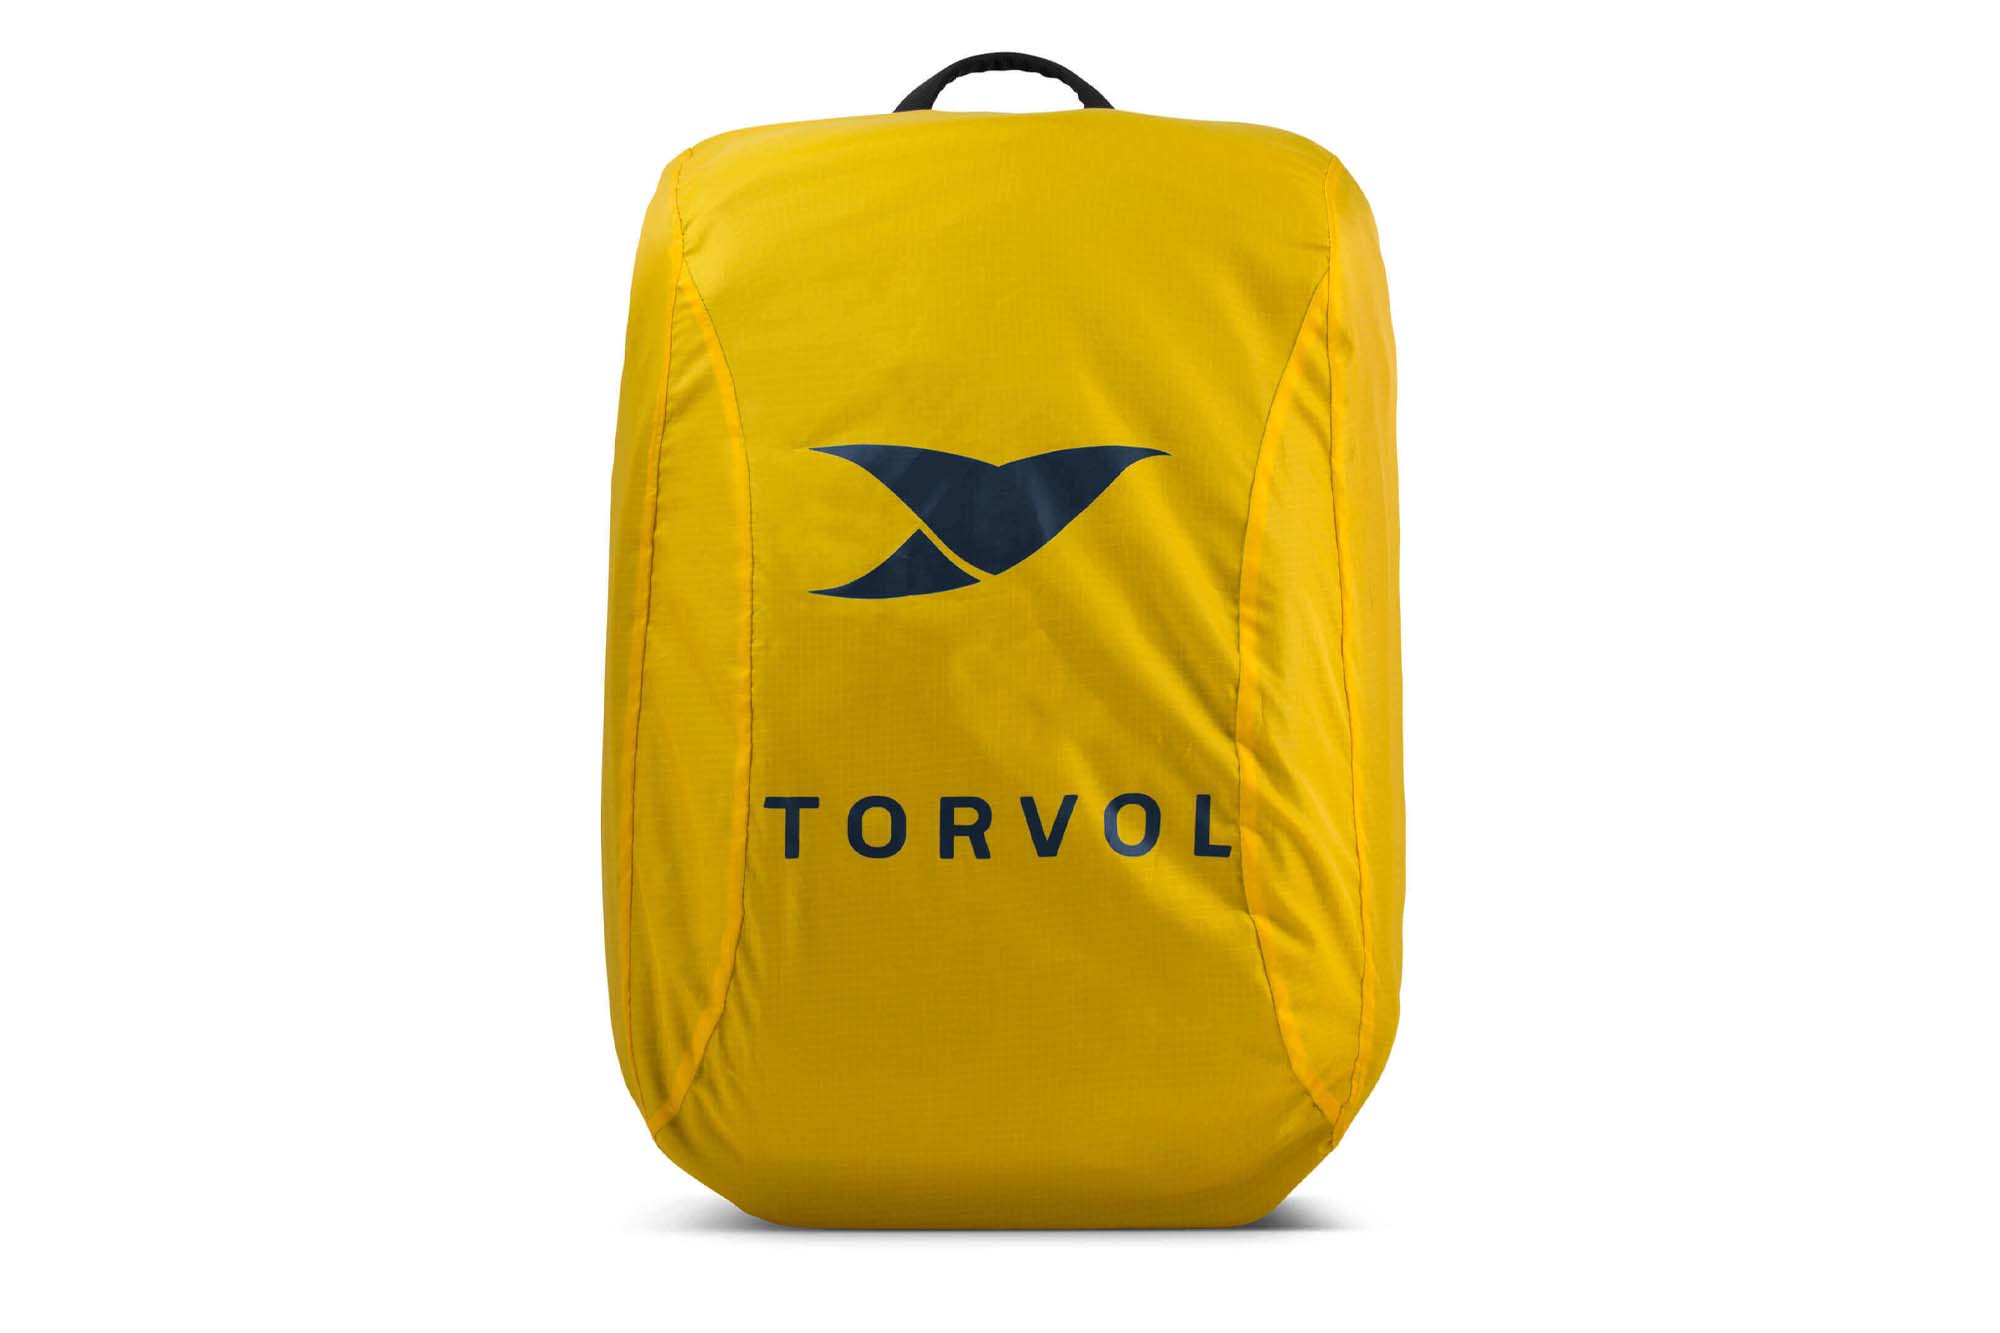 Torvol Drone Adventure Backpack- TO013